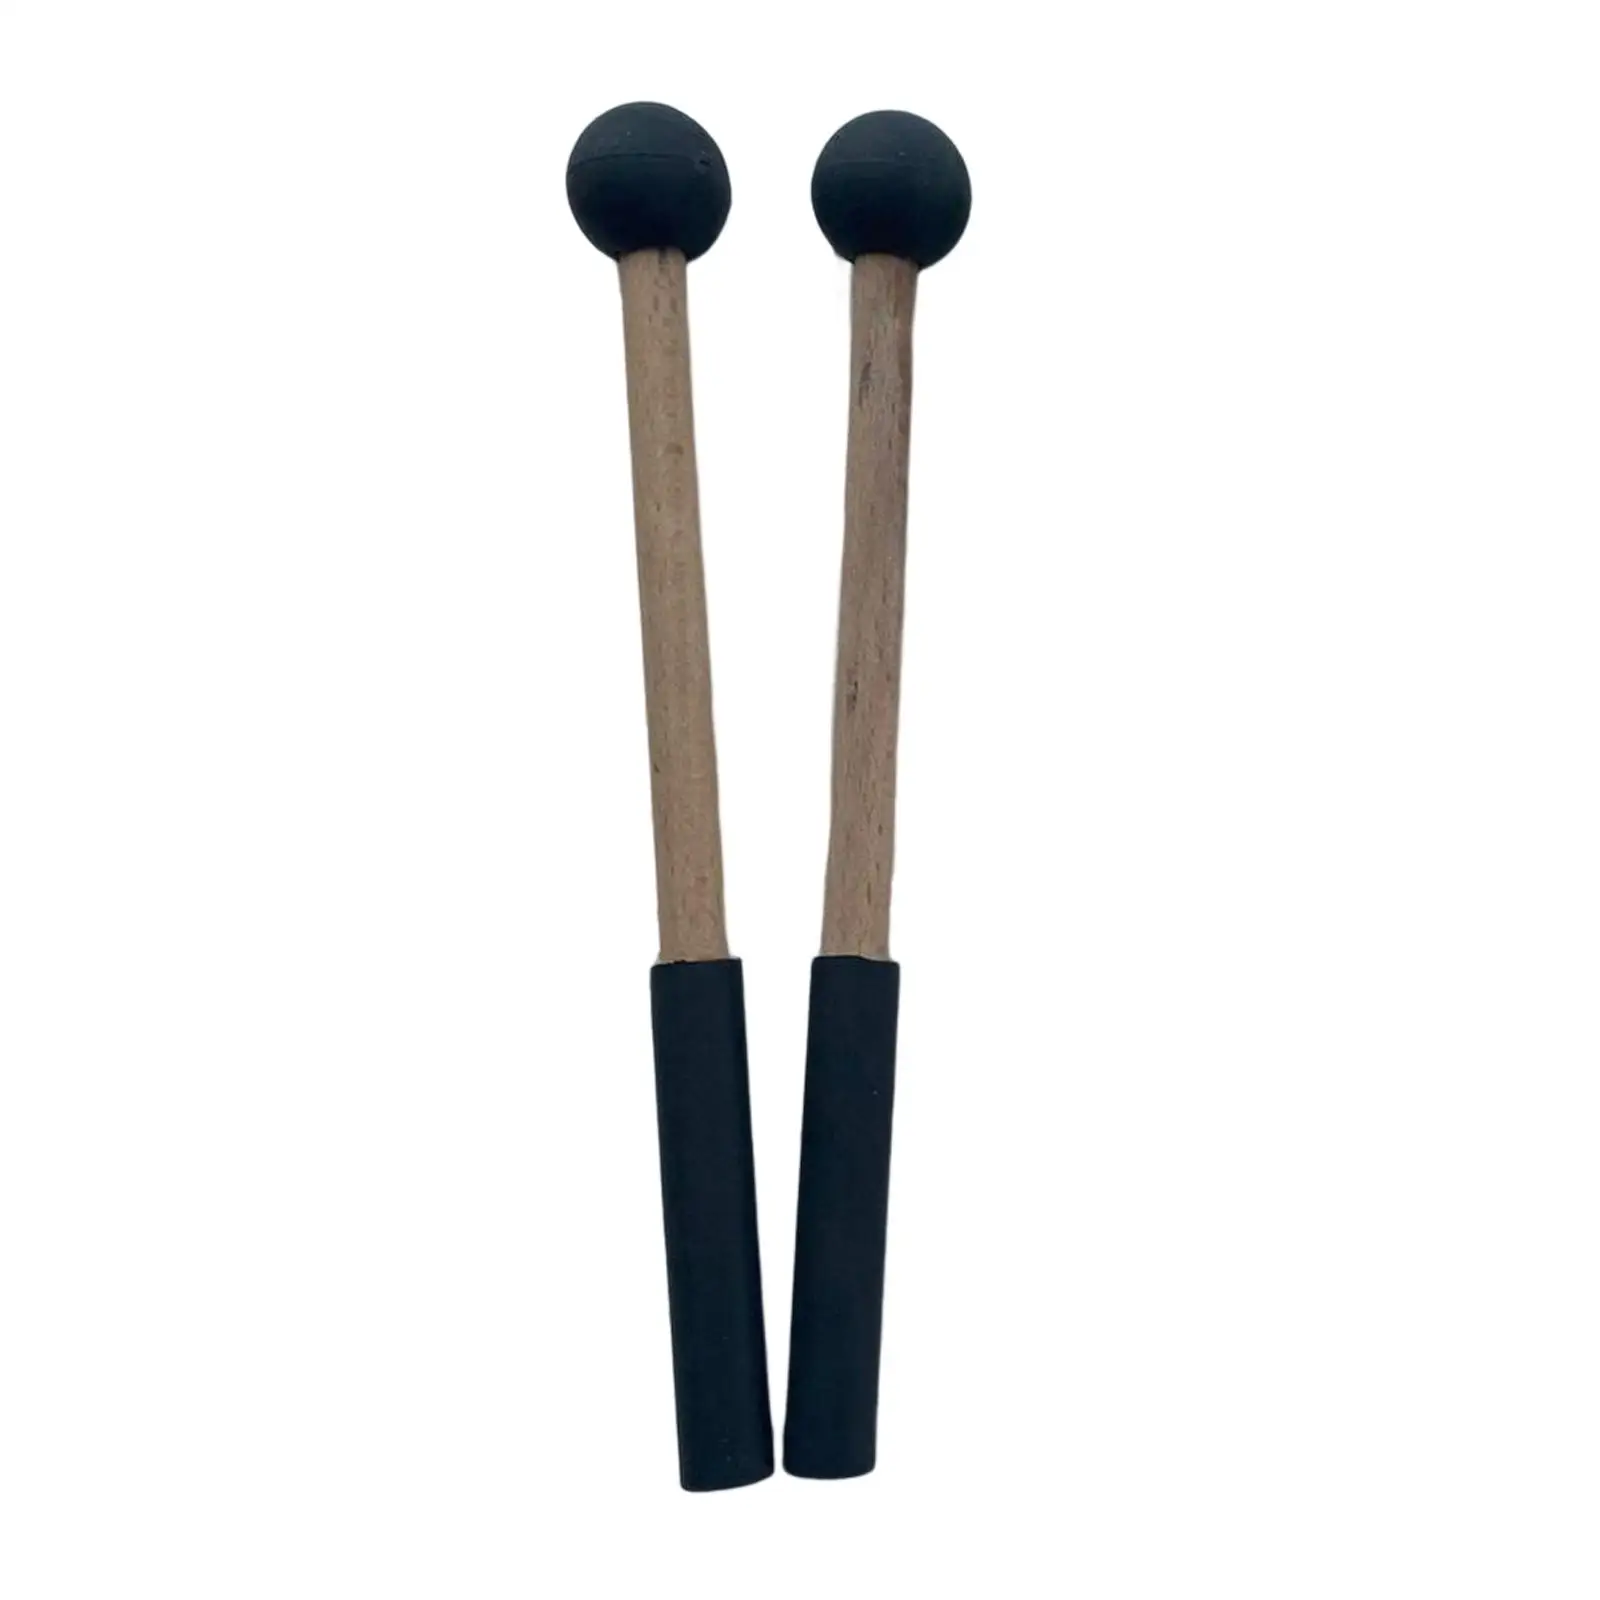 2 Pieces Wooden Silicone Drumsticks Hand Percussion Mallets for Xylophone